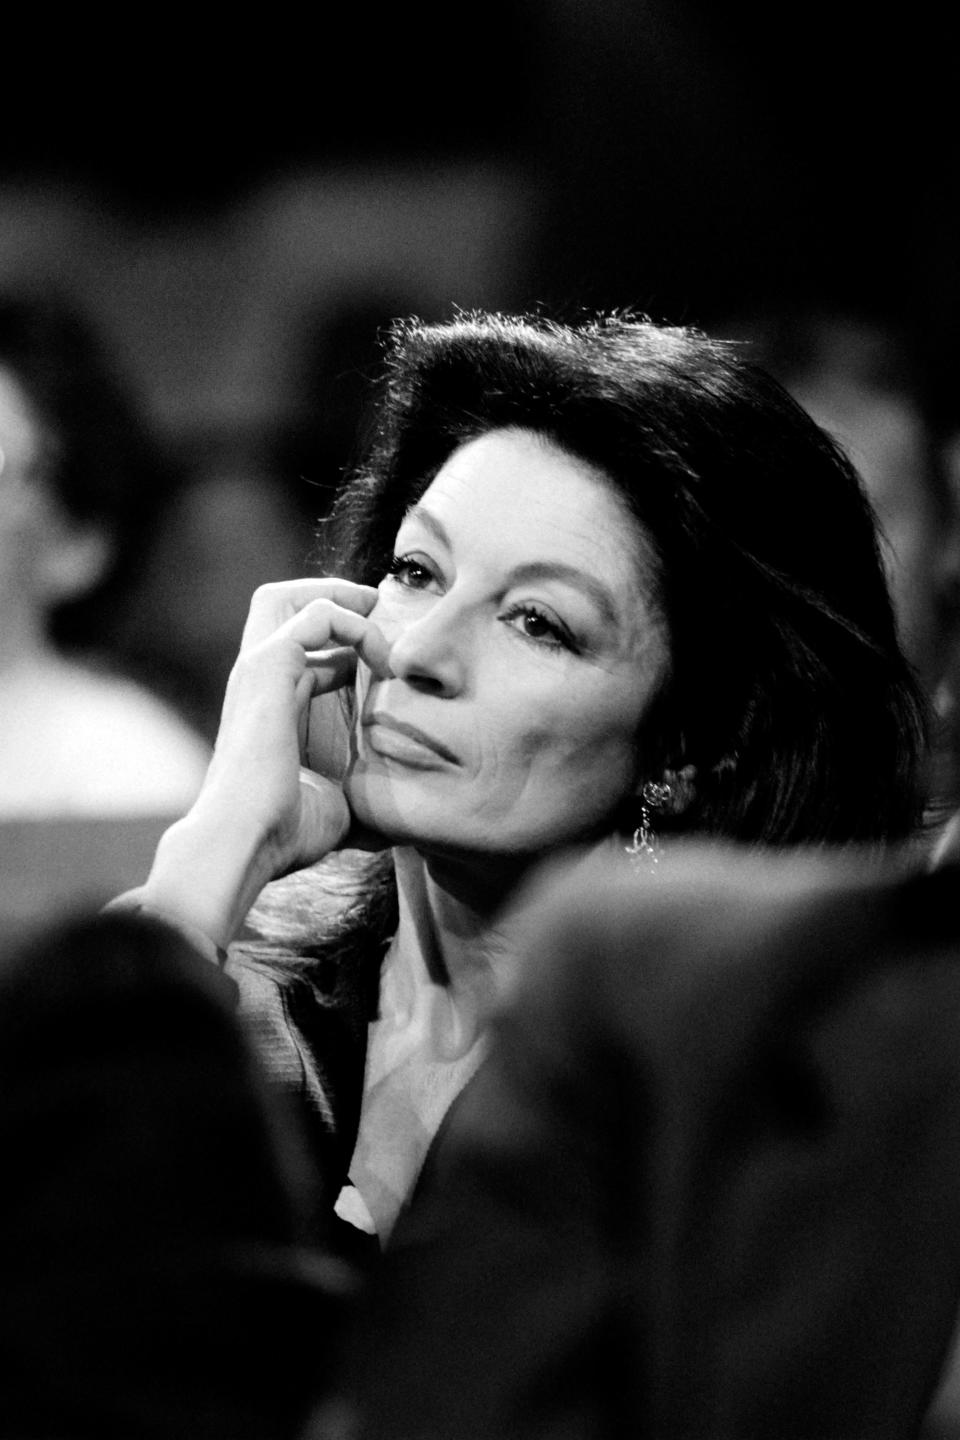 Anouk Aimée earned an Oscar nomination for her role in "A Man and A Woman."